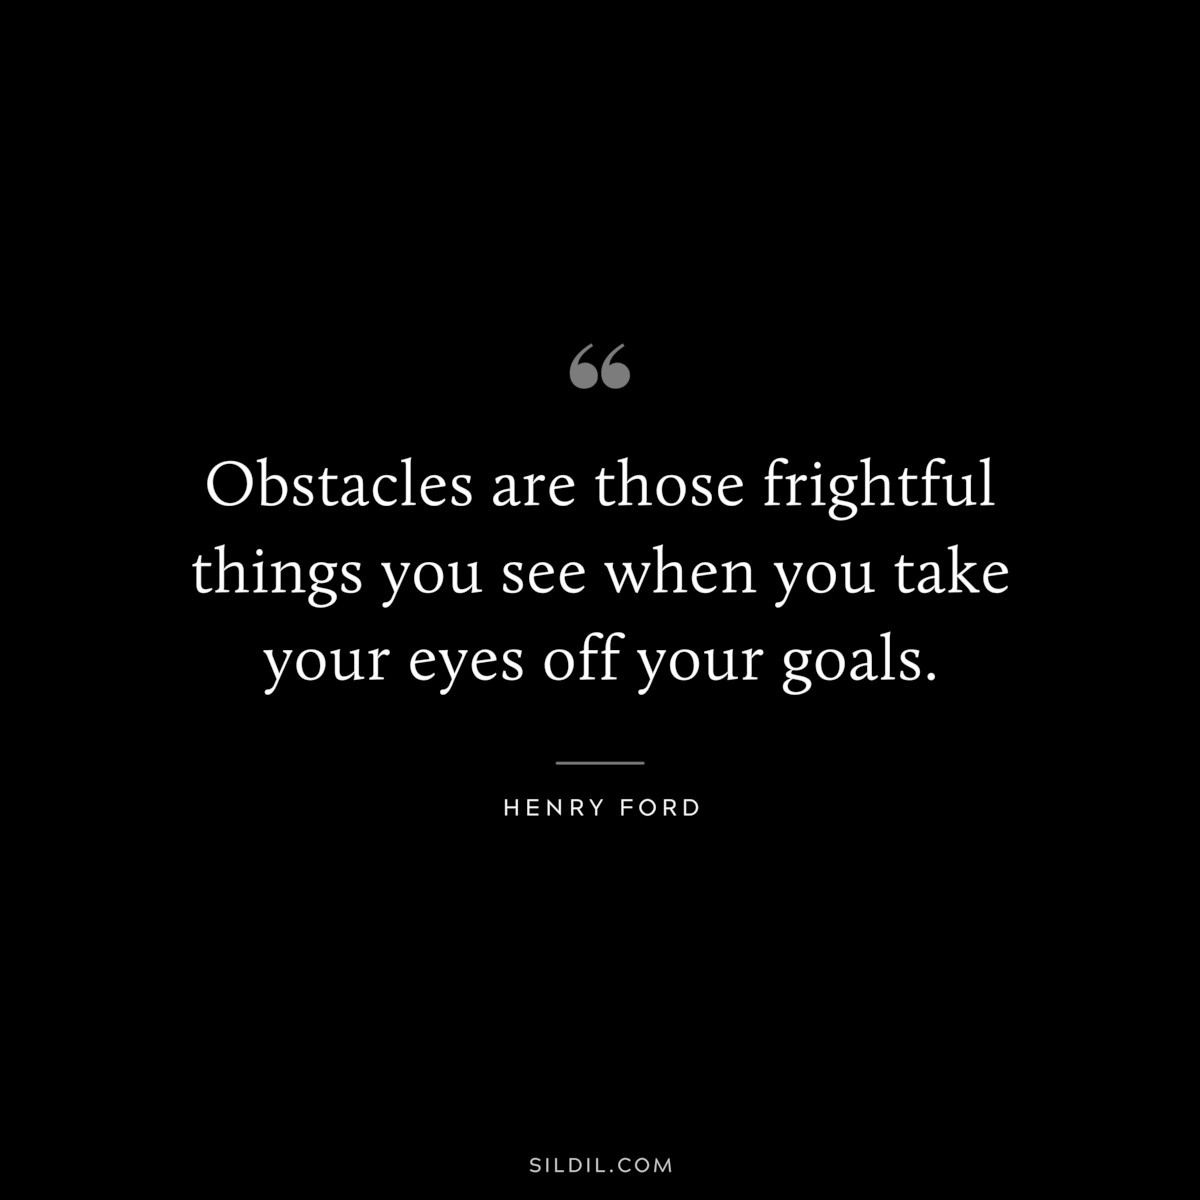 Obstacles are those frightful things you see when you take your eyes off your goals. ― Henry Ford